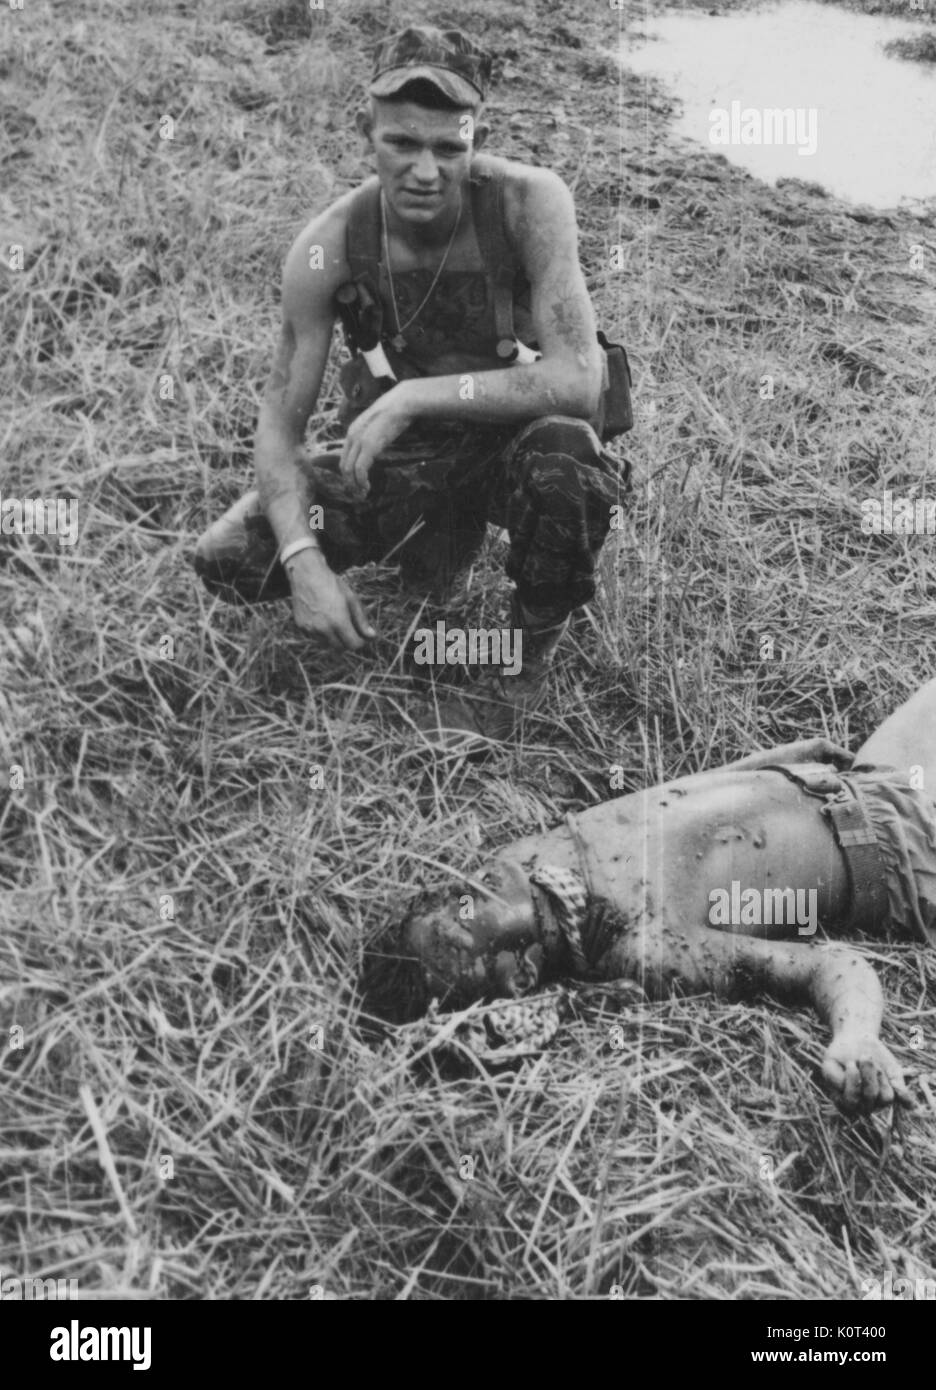 American advisor in uniform, in Vietnam, kneeling over the mutilated body of a dead Viet Cong soldier laid on a grassy field, early in the Vietnam War, WARNING: GRAPHIC, 1961. Stock Photo